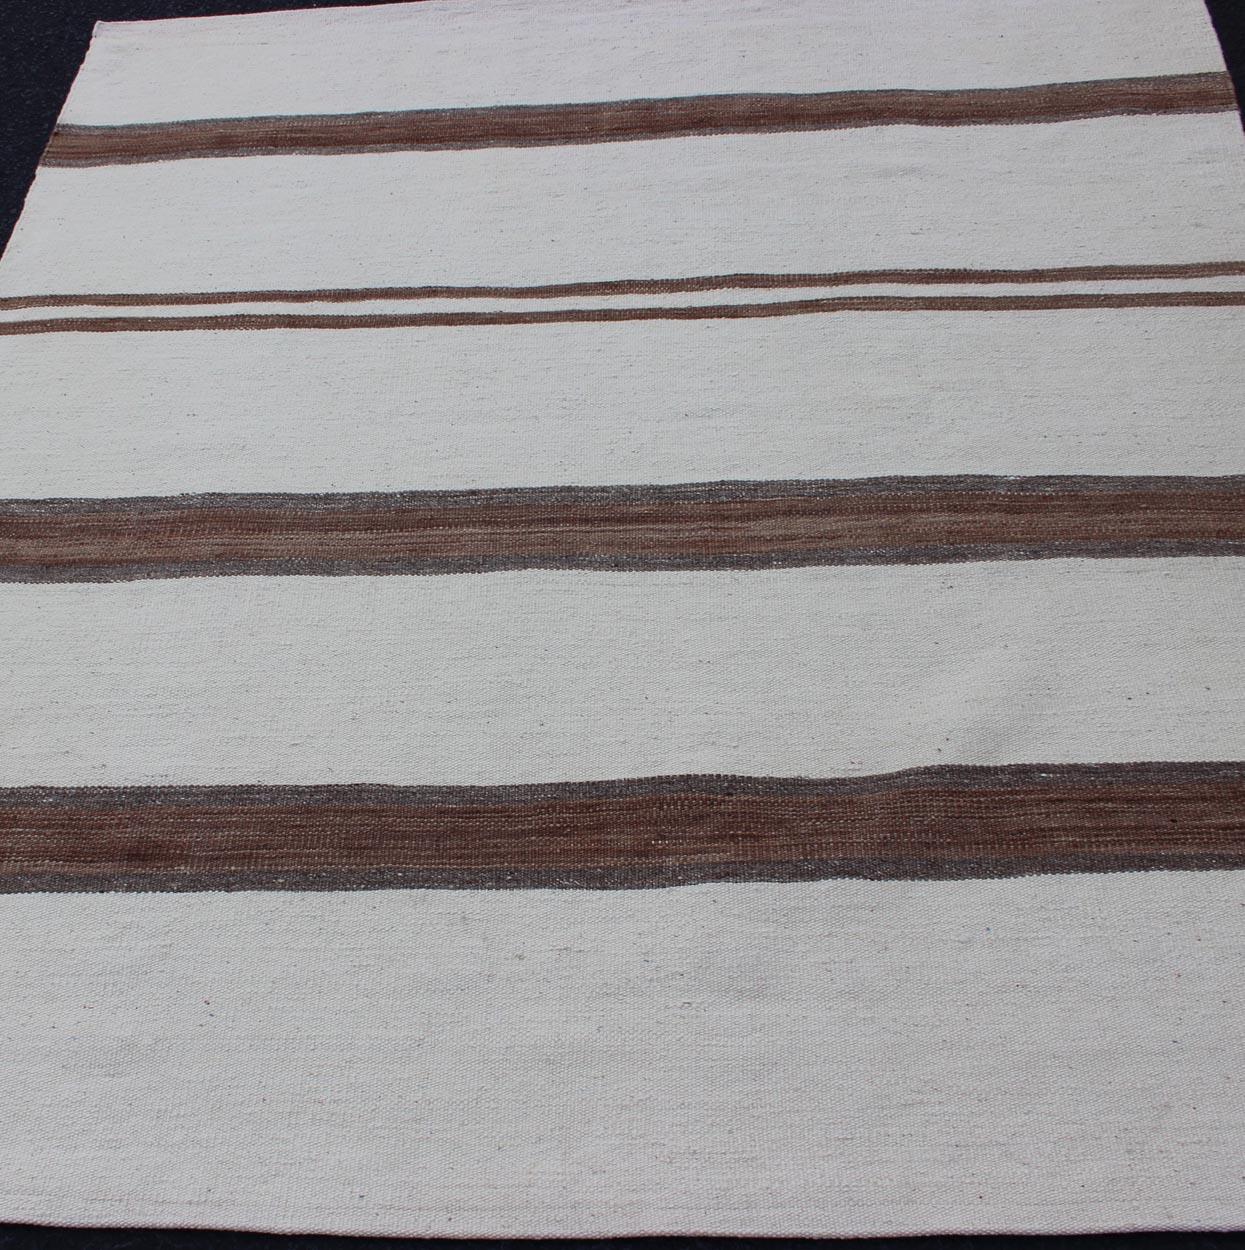 Turkish Vintage Kilim Flat-Weave Rug in Off White, Brown with Stripe Design In Excellent Condition For Sale In Atlanta, GA